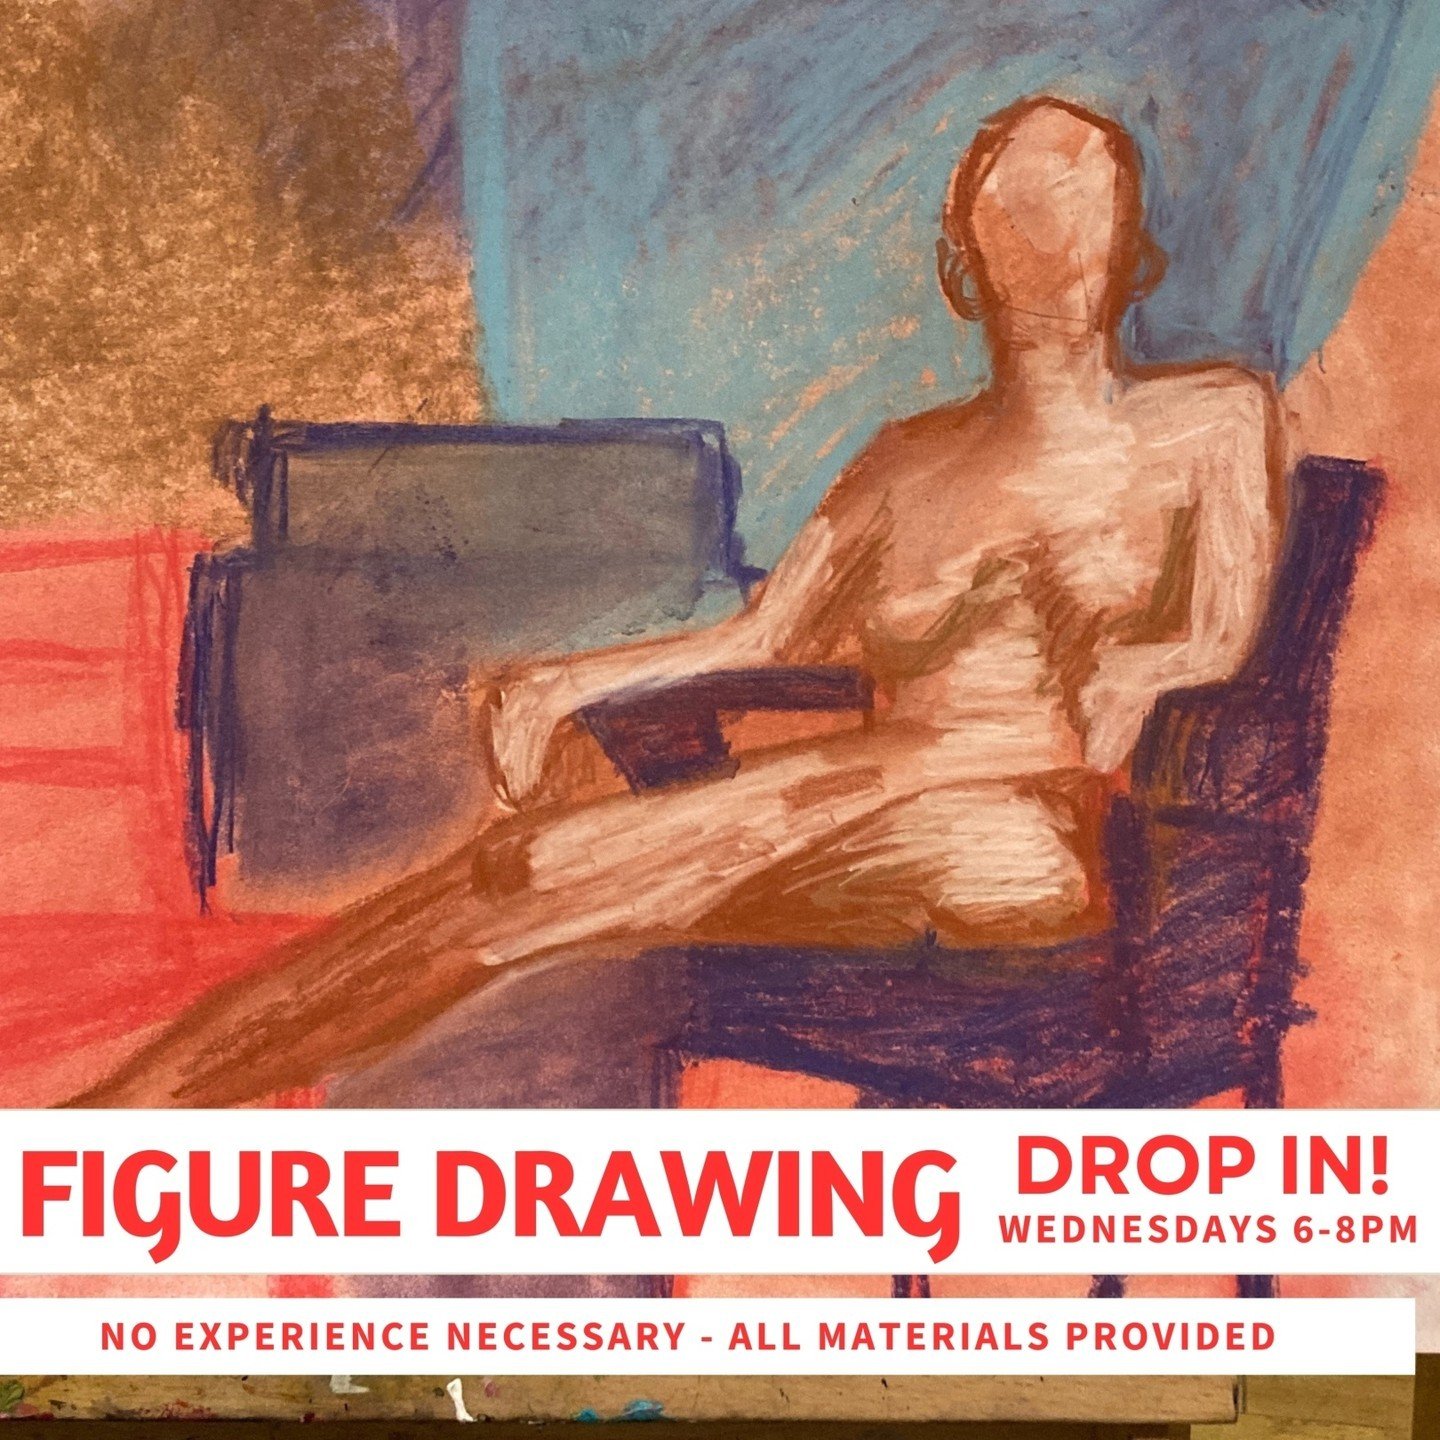 JOIN US TONIGHT!! 

Slow River Studio owner and creator of contagious joy Jess Yurwitz will be leading our figure drawing session tonight, May 15th from 6-8pm and we've got a couple of open easels available for drop in!

Figure drawing can be a wonde